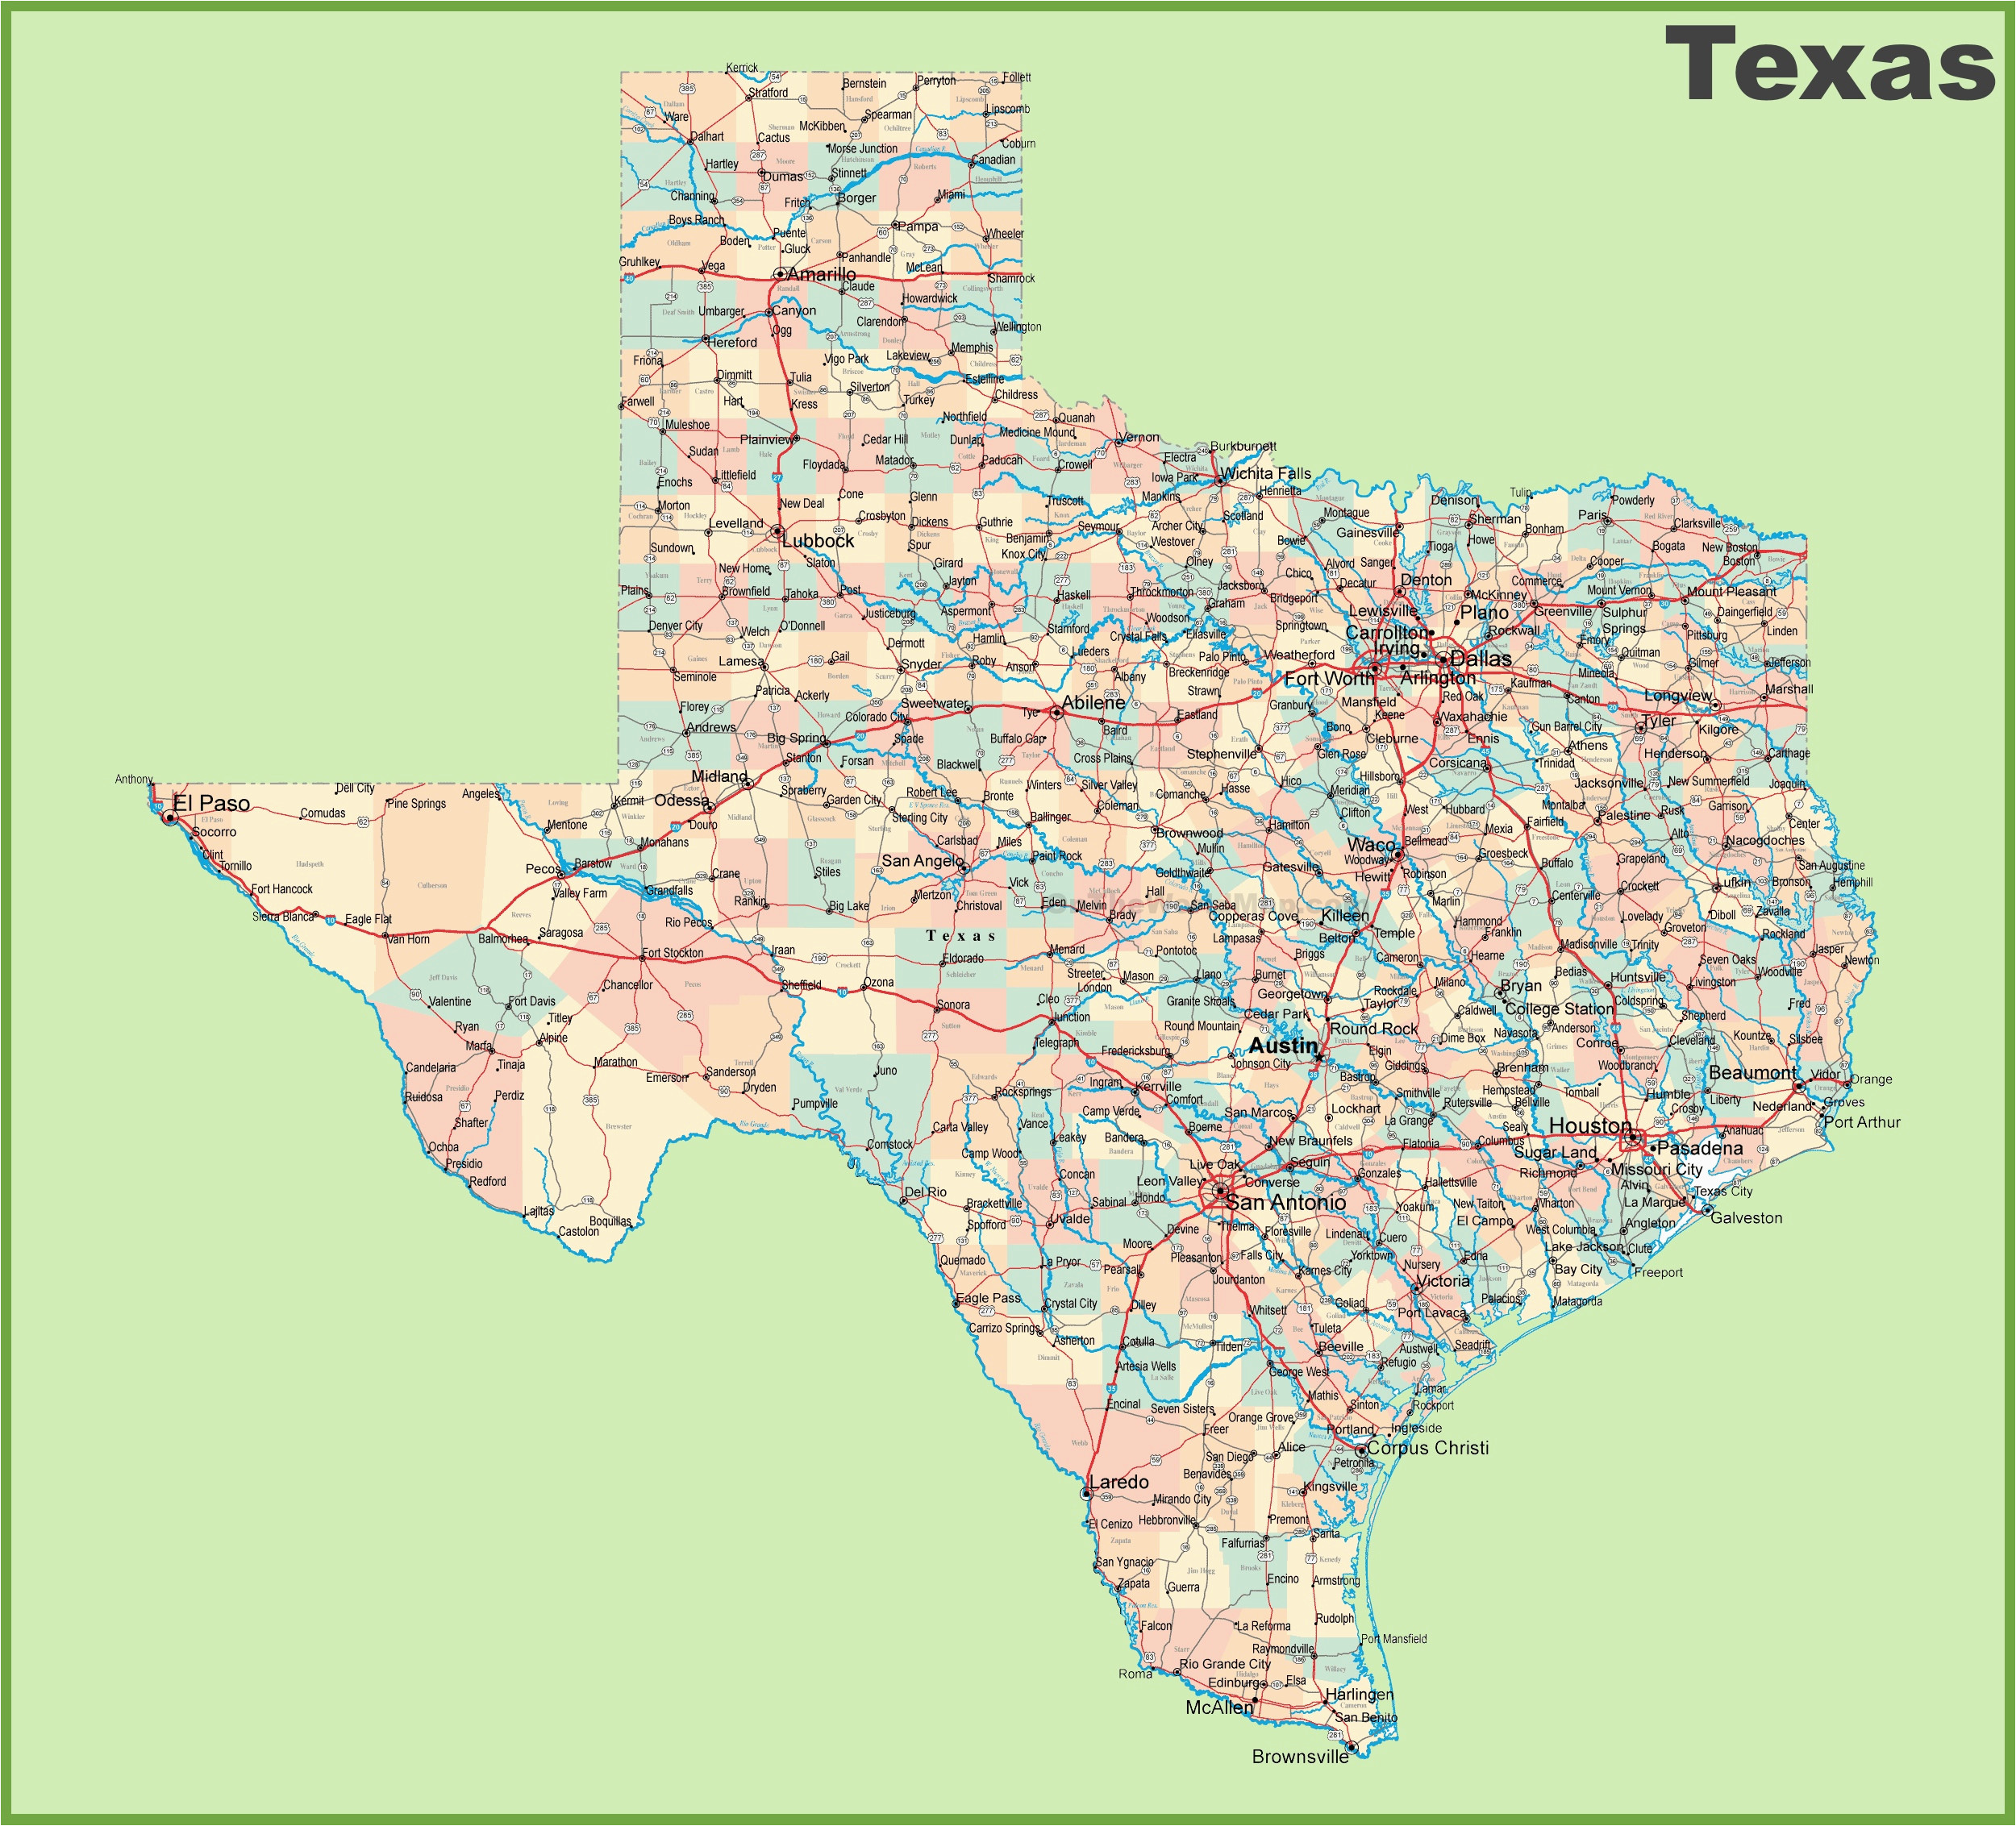 Texas Road Map State Road Map Of Texas with Cities